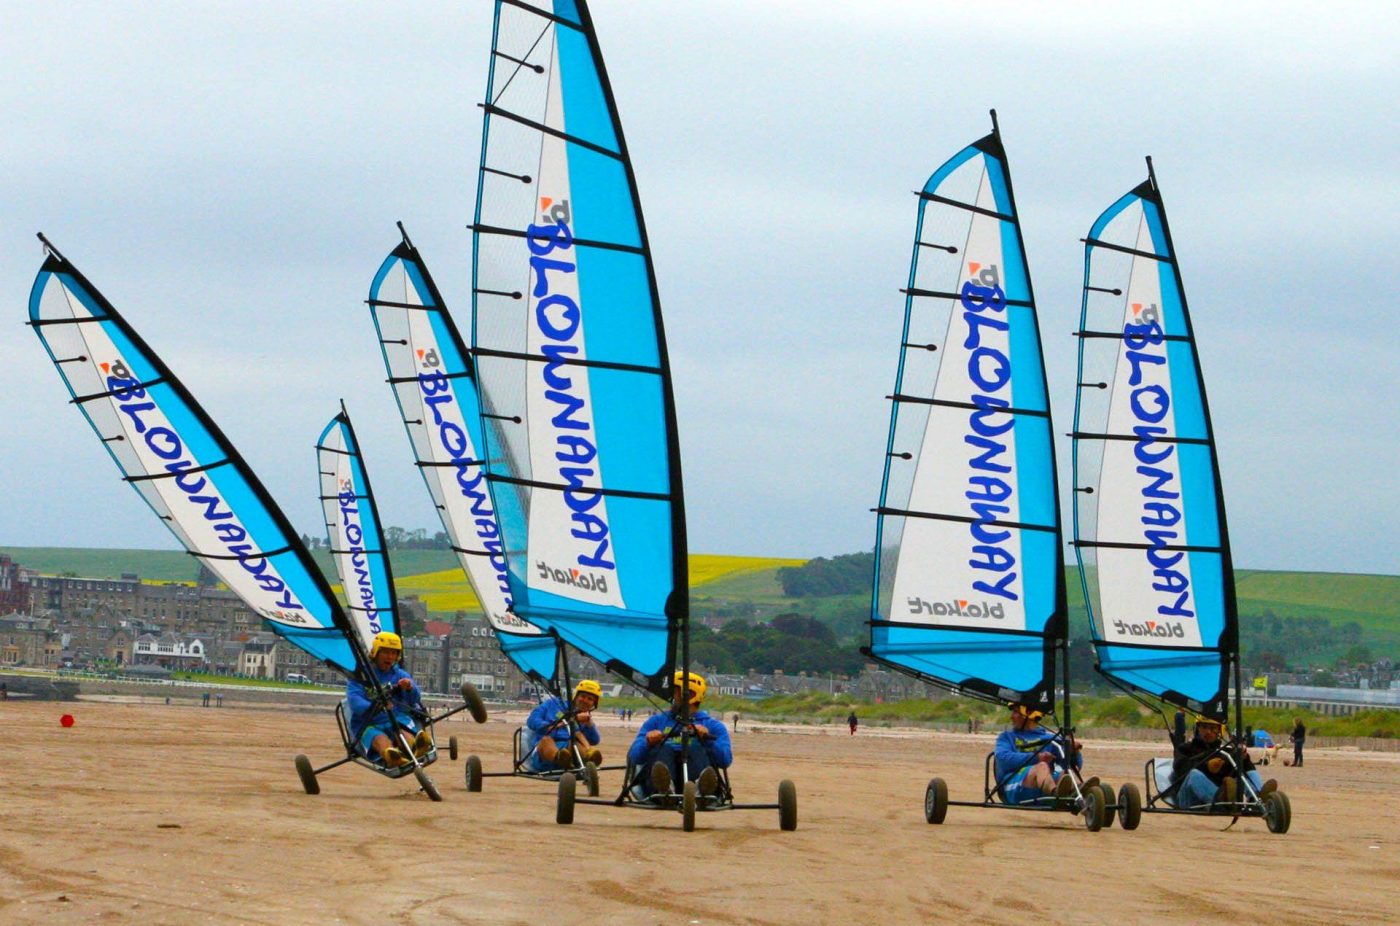 land yachting pendine sands